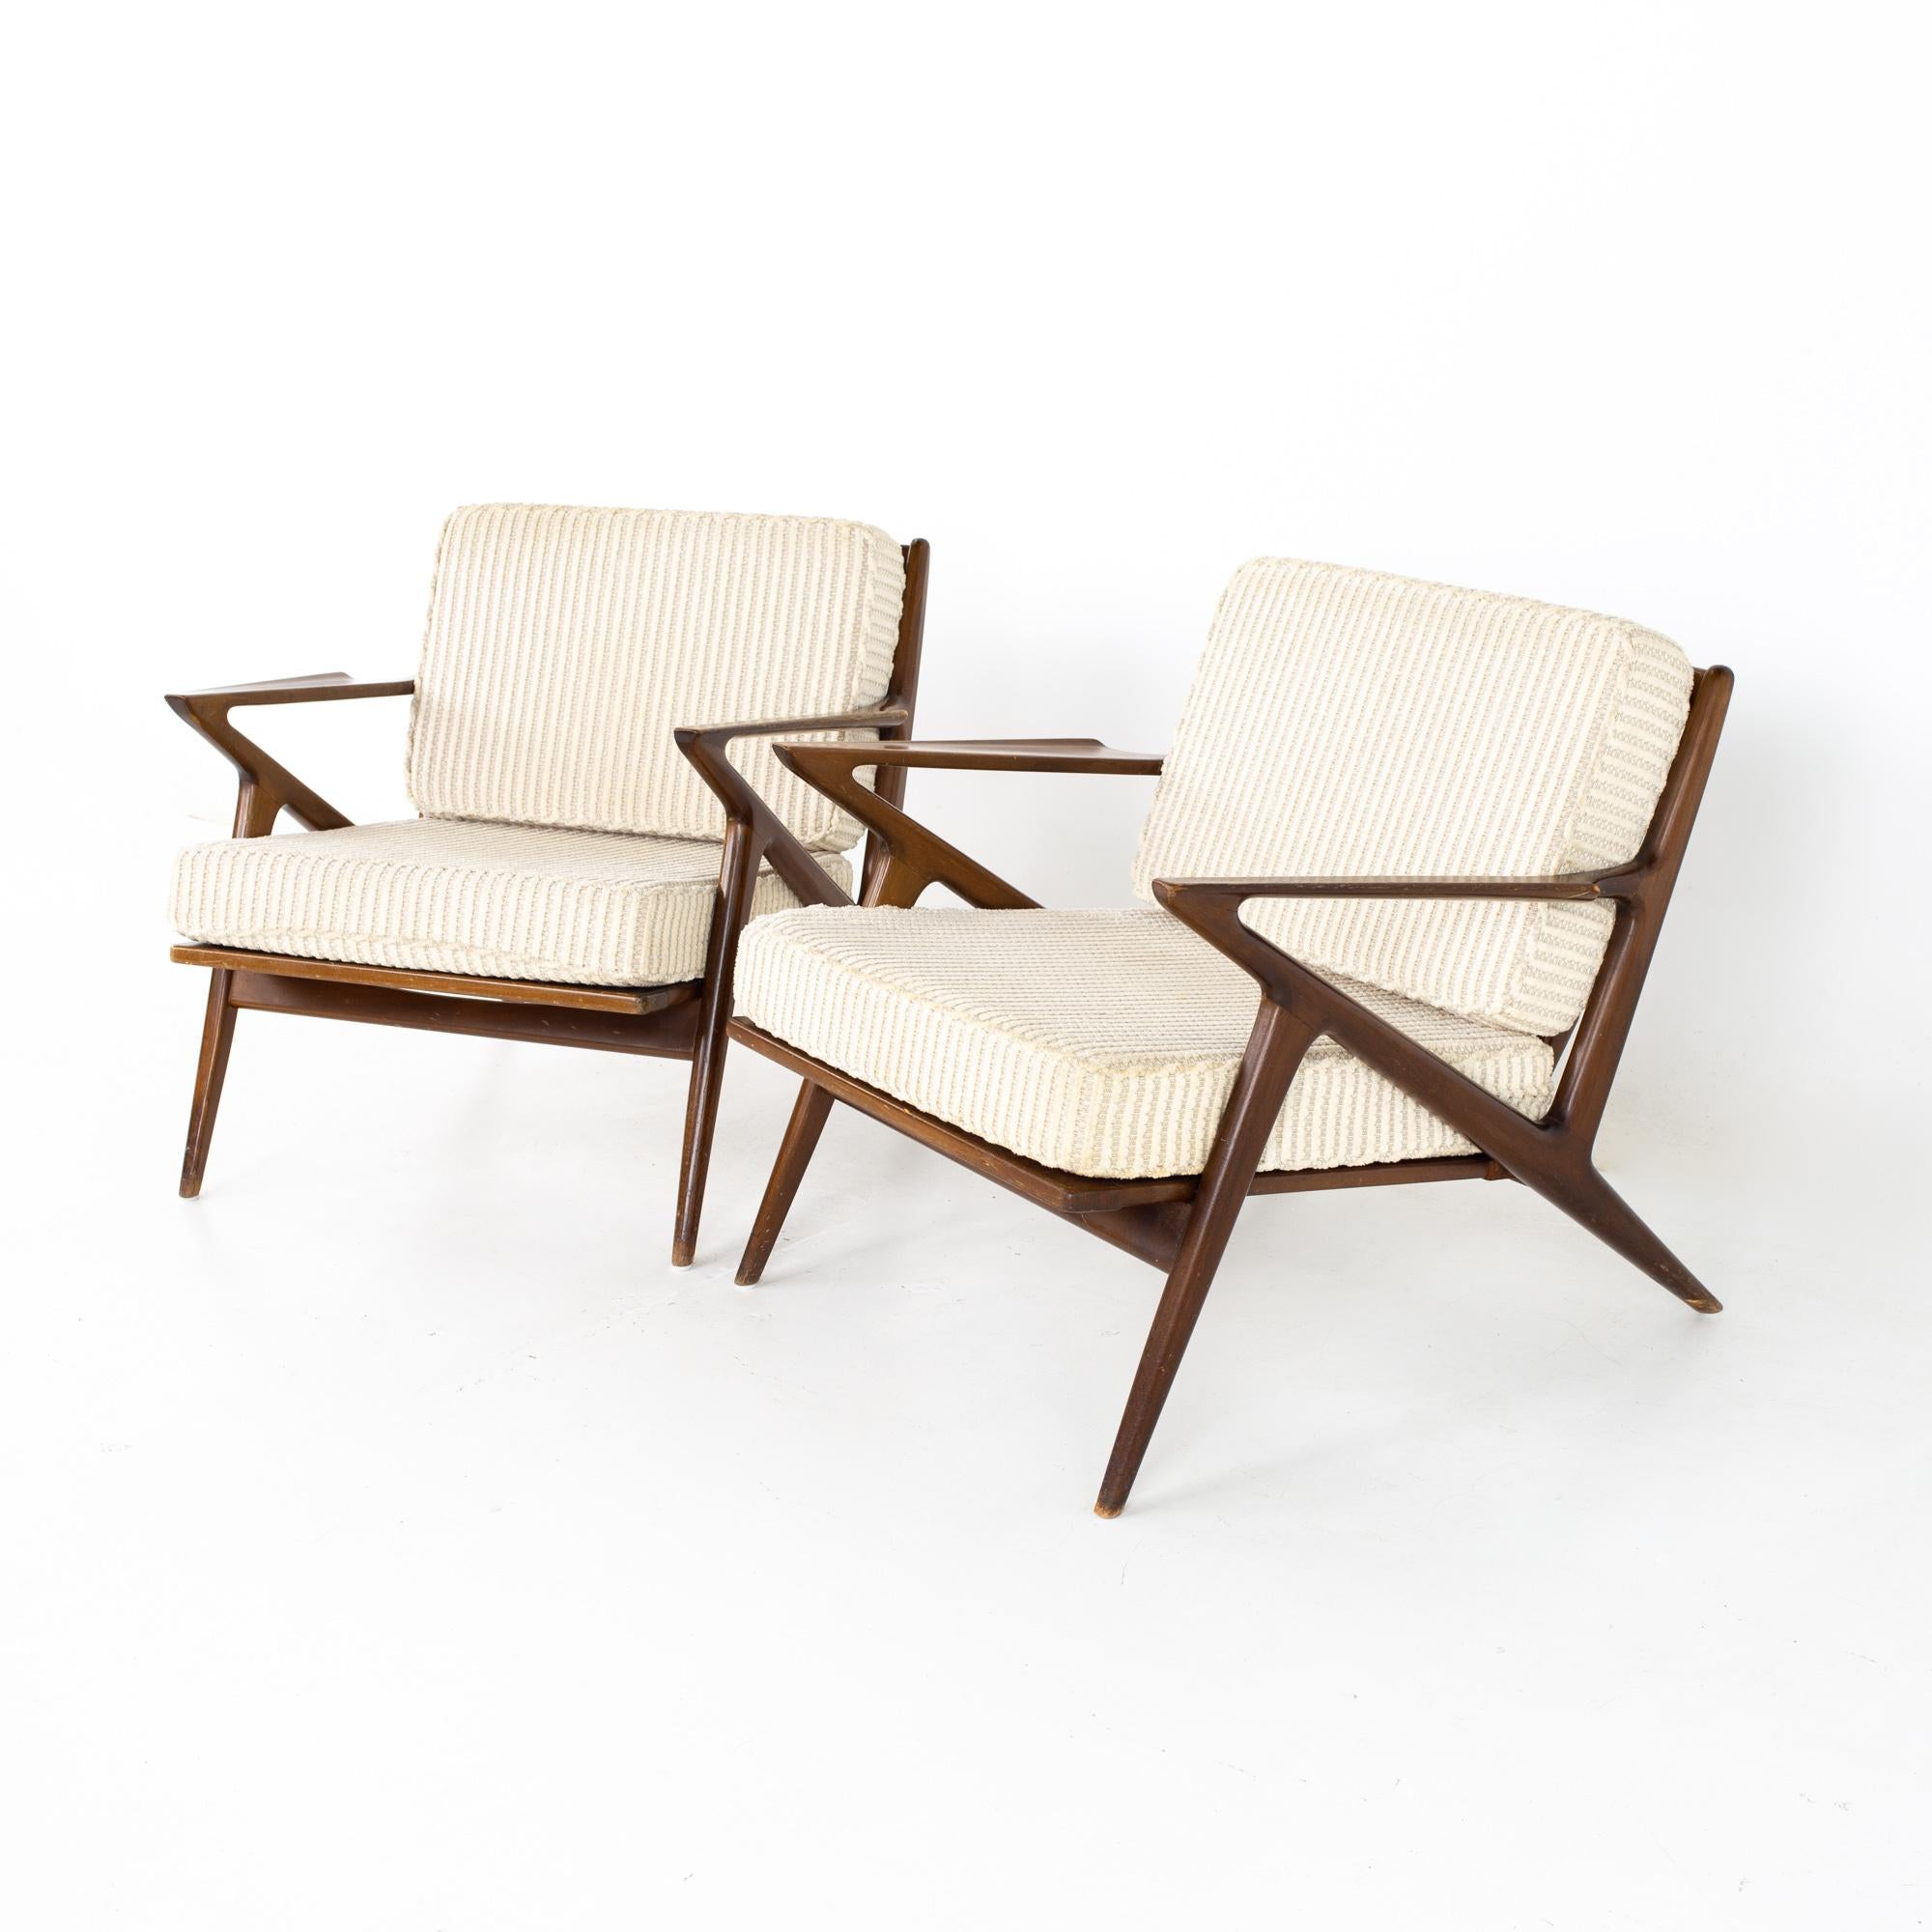 Poul Jensen for Selig mid century Z lounge chair - pair
Chair measures: 29.75 wide x 31 deep x 27 high, with a seat height of 16 inches

All pieces of furniture can be had in what we call restored vintage condition. That means the piece is